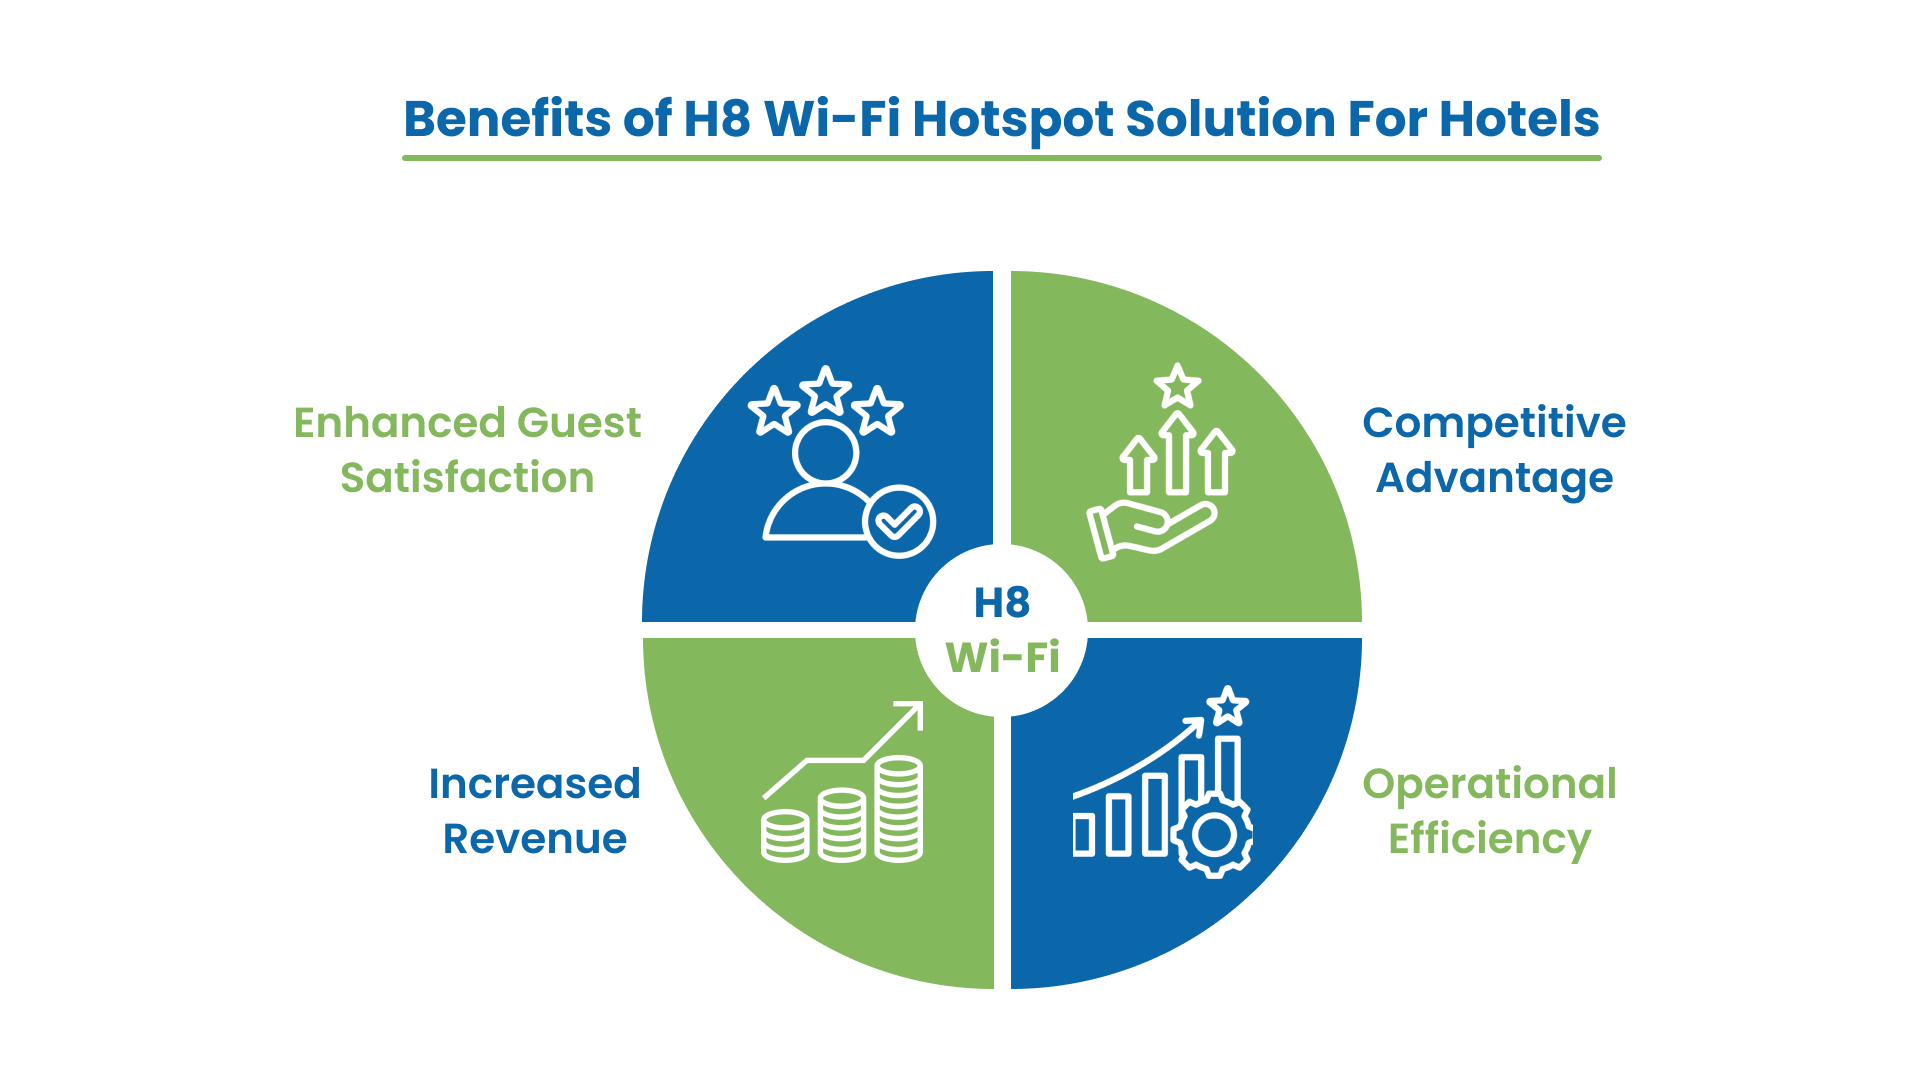 Benefits of H8 Wi-Fi Hotspot Solution For Hotels